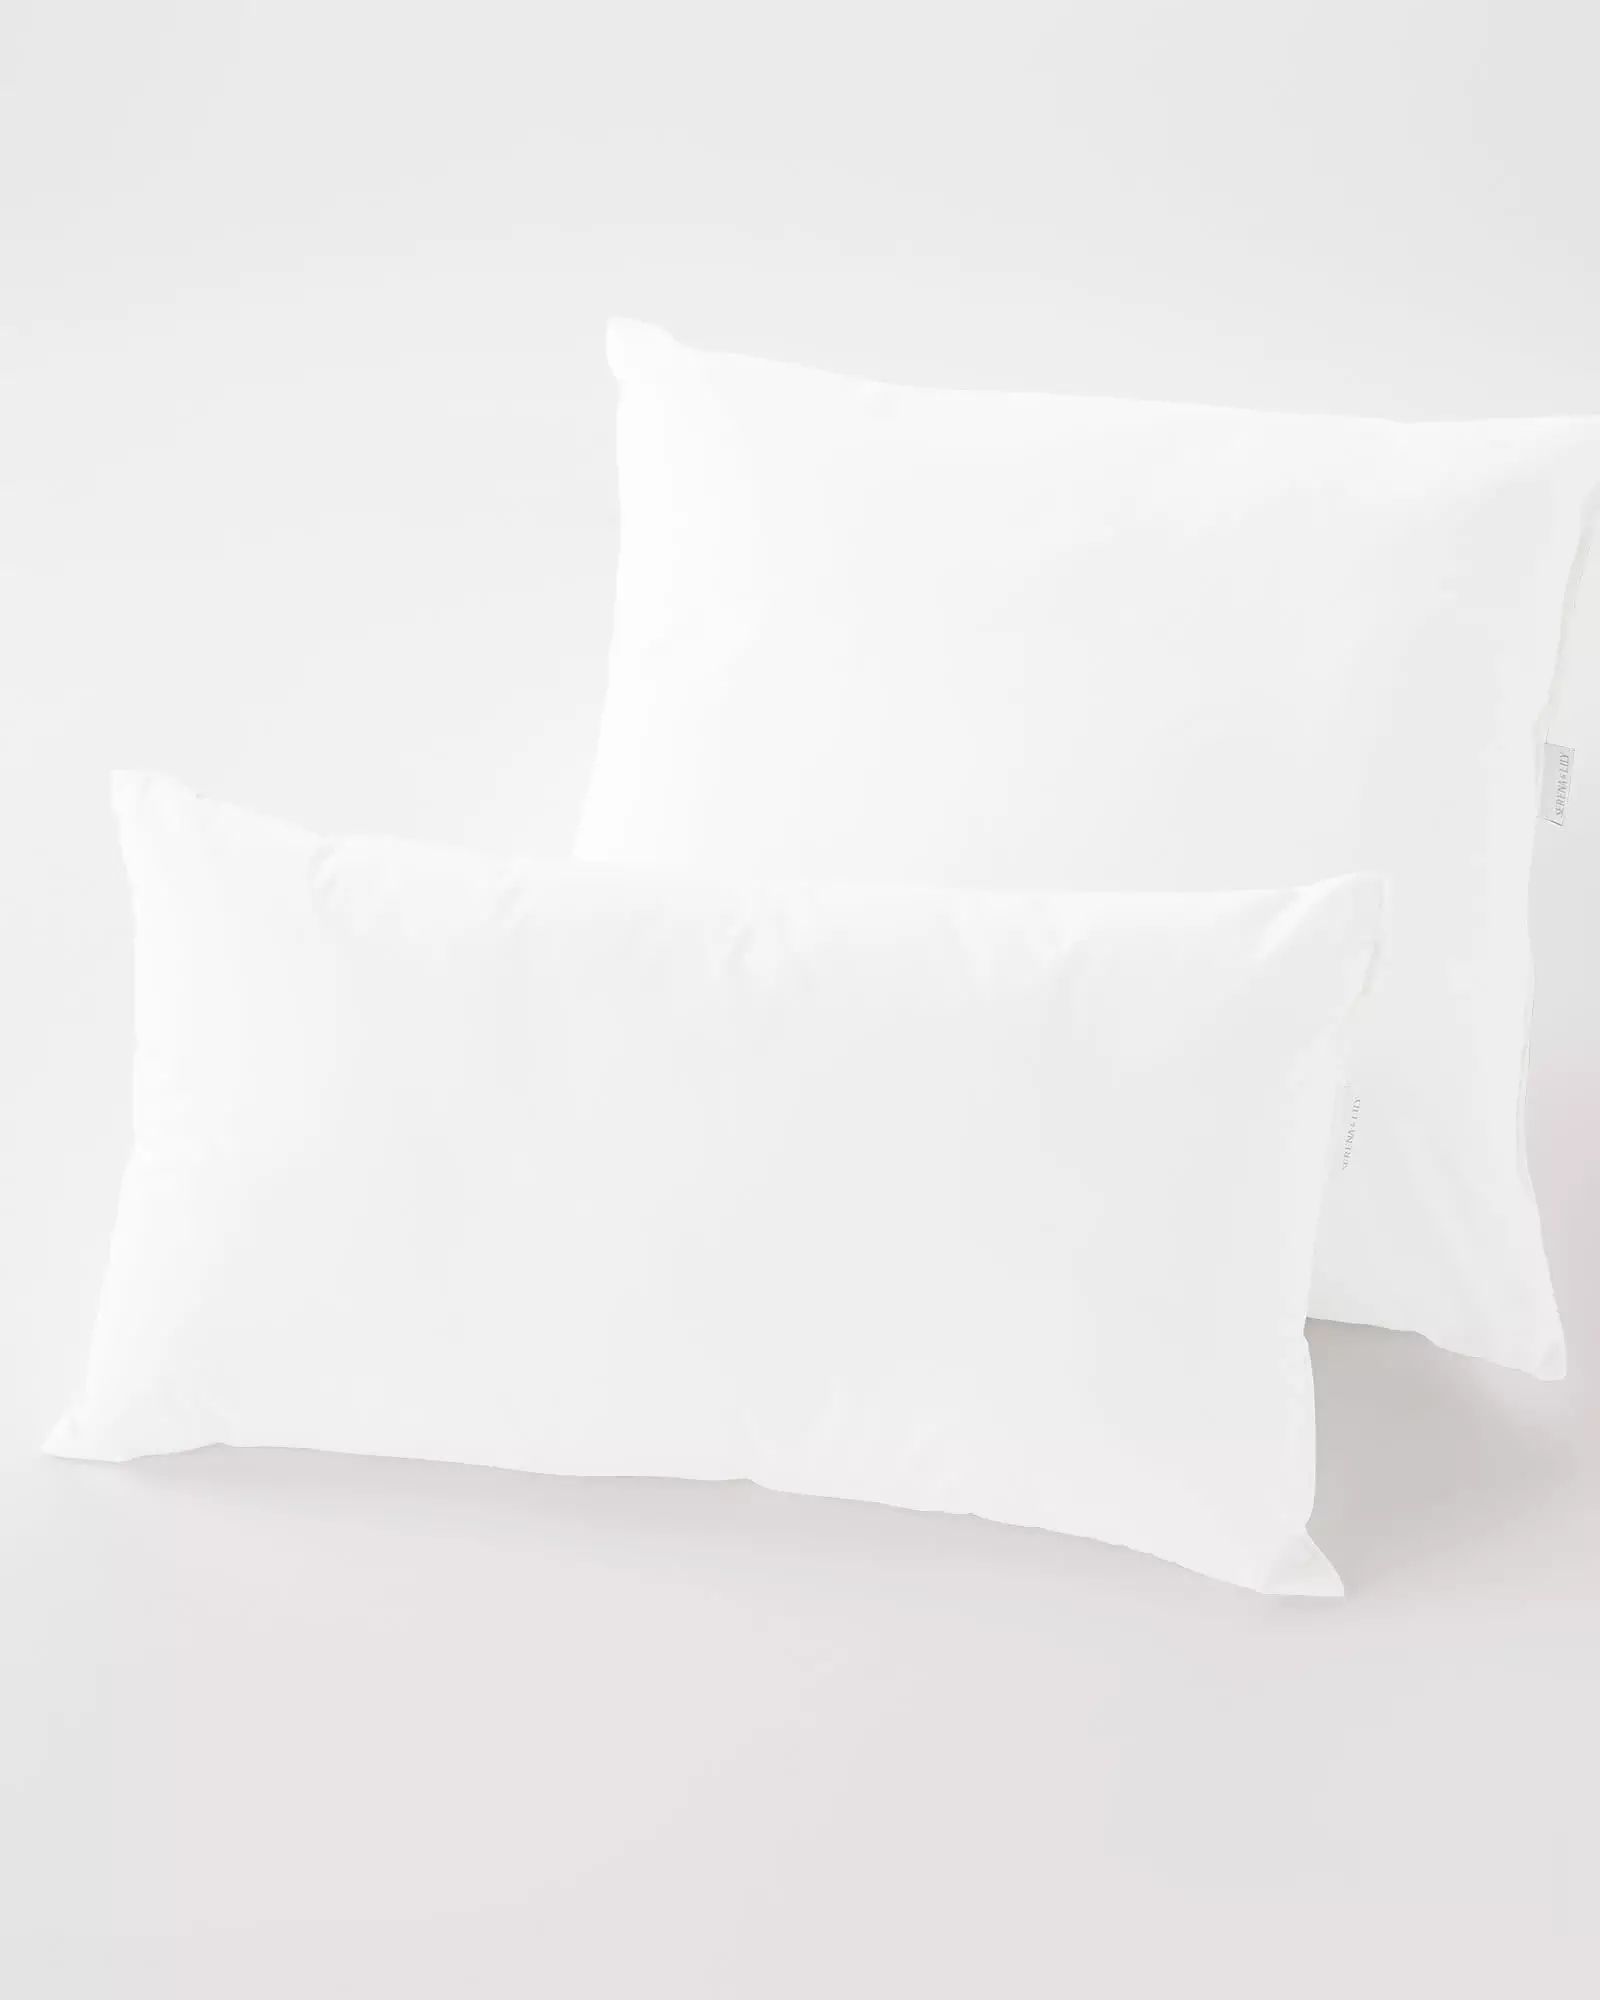 Outdoor Pillow Inserts | Serena and Lily